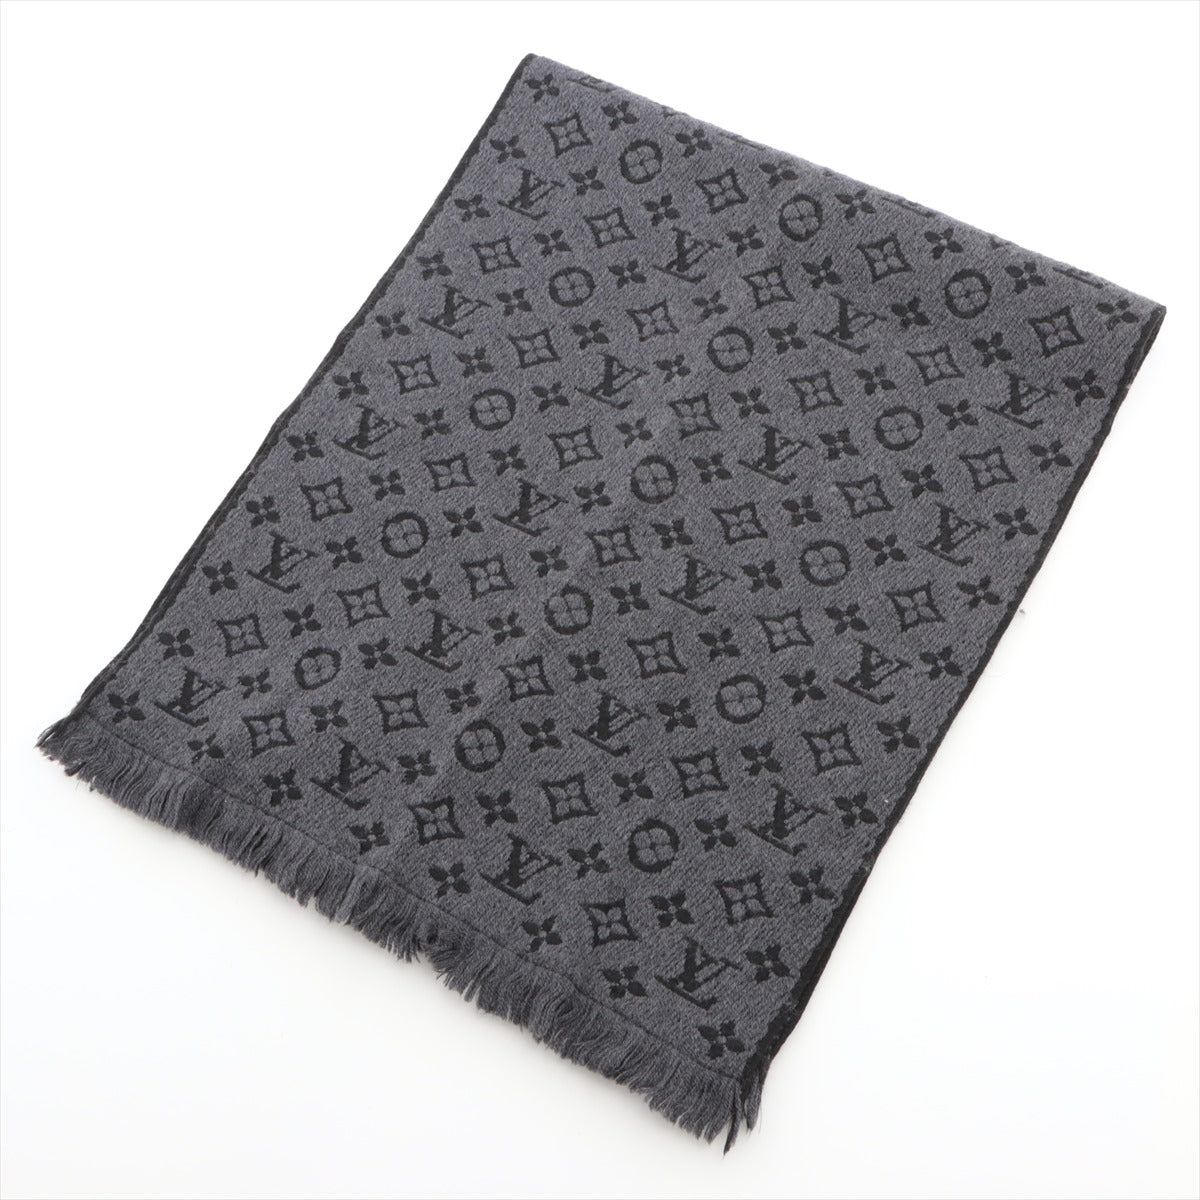 Buy Louis Vuitton Monogram Classic Scarf Scarves (Charcoal grey) at